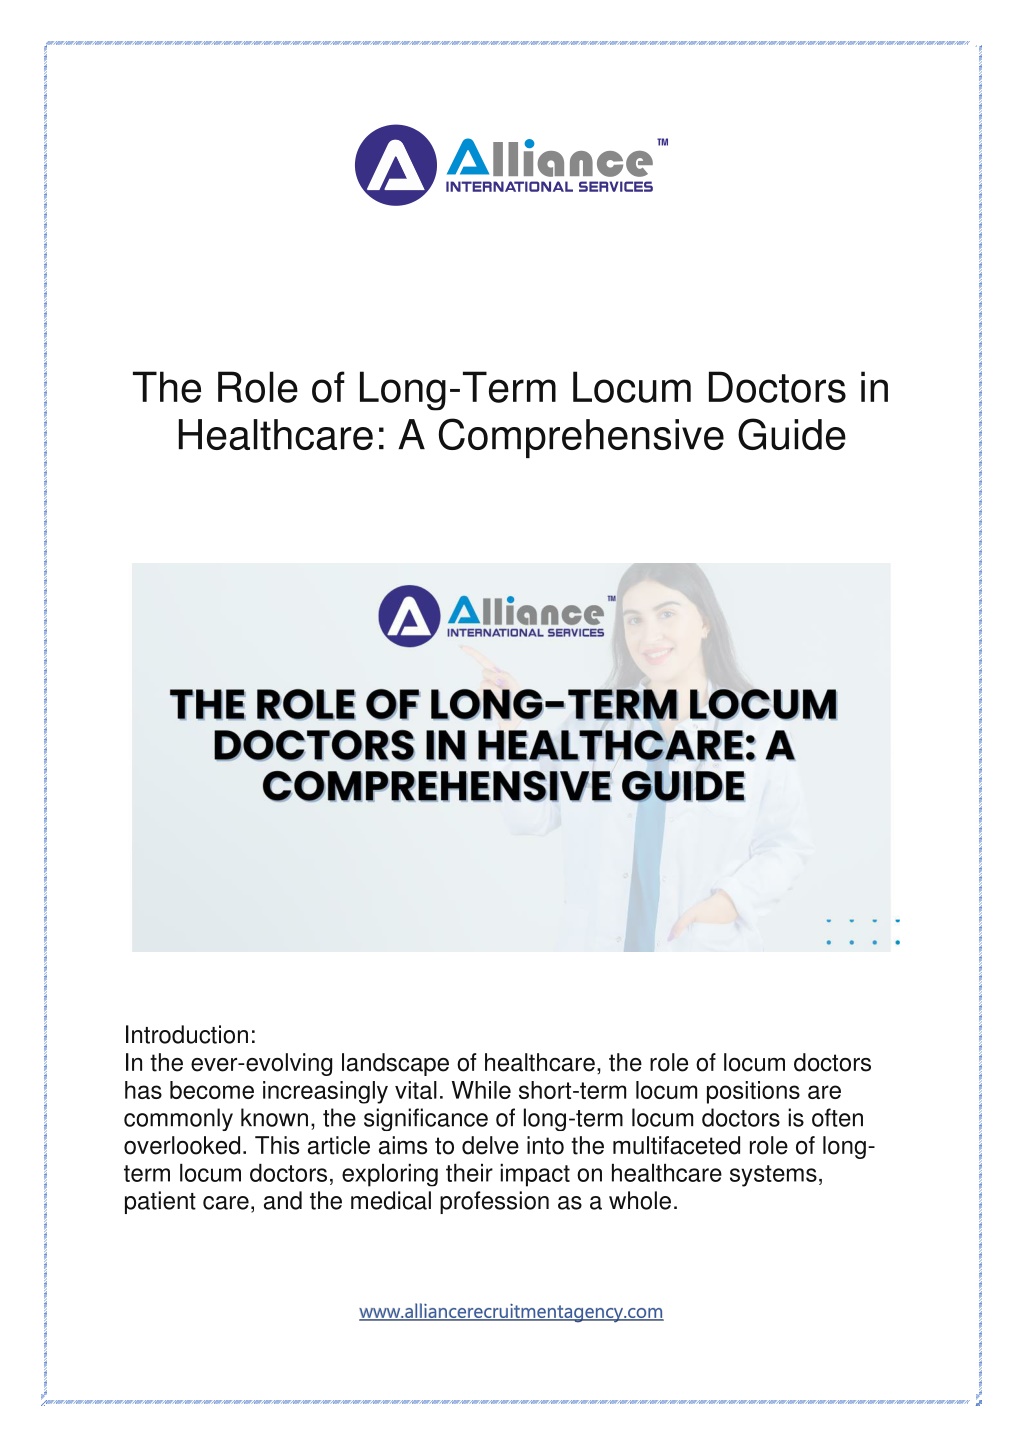 the role of long term locum doctors in healthcare l.w